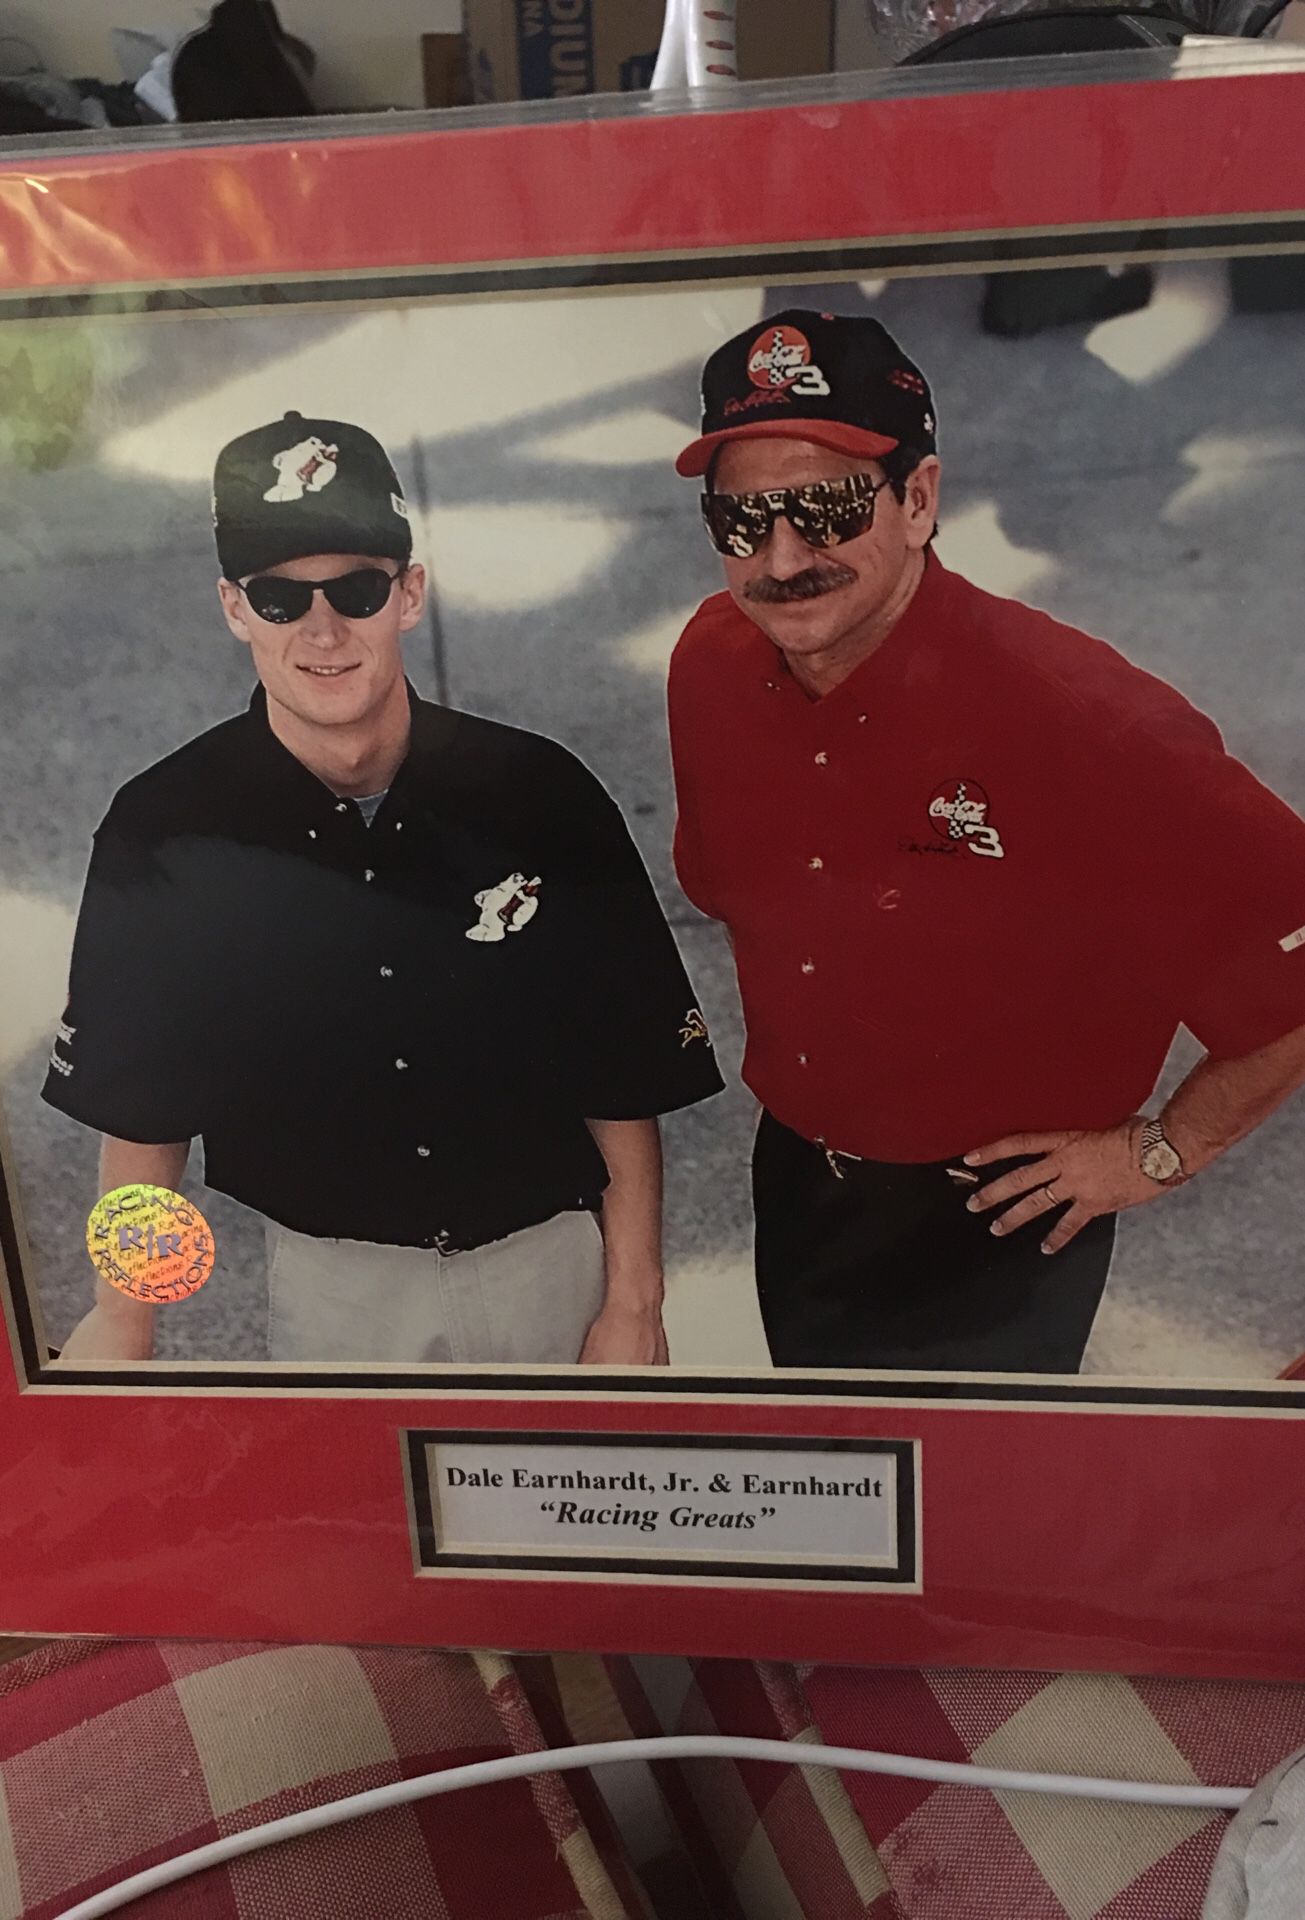 Earnhardts sport pic...